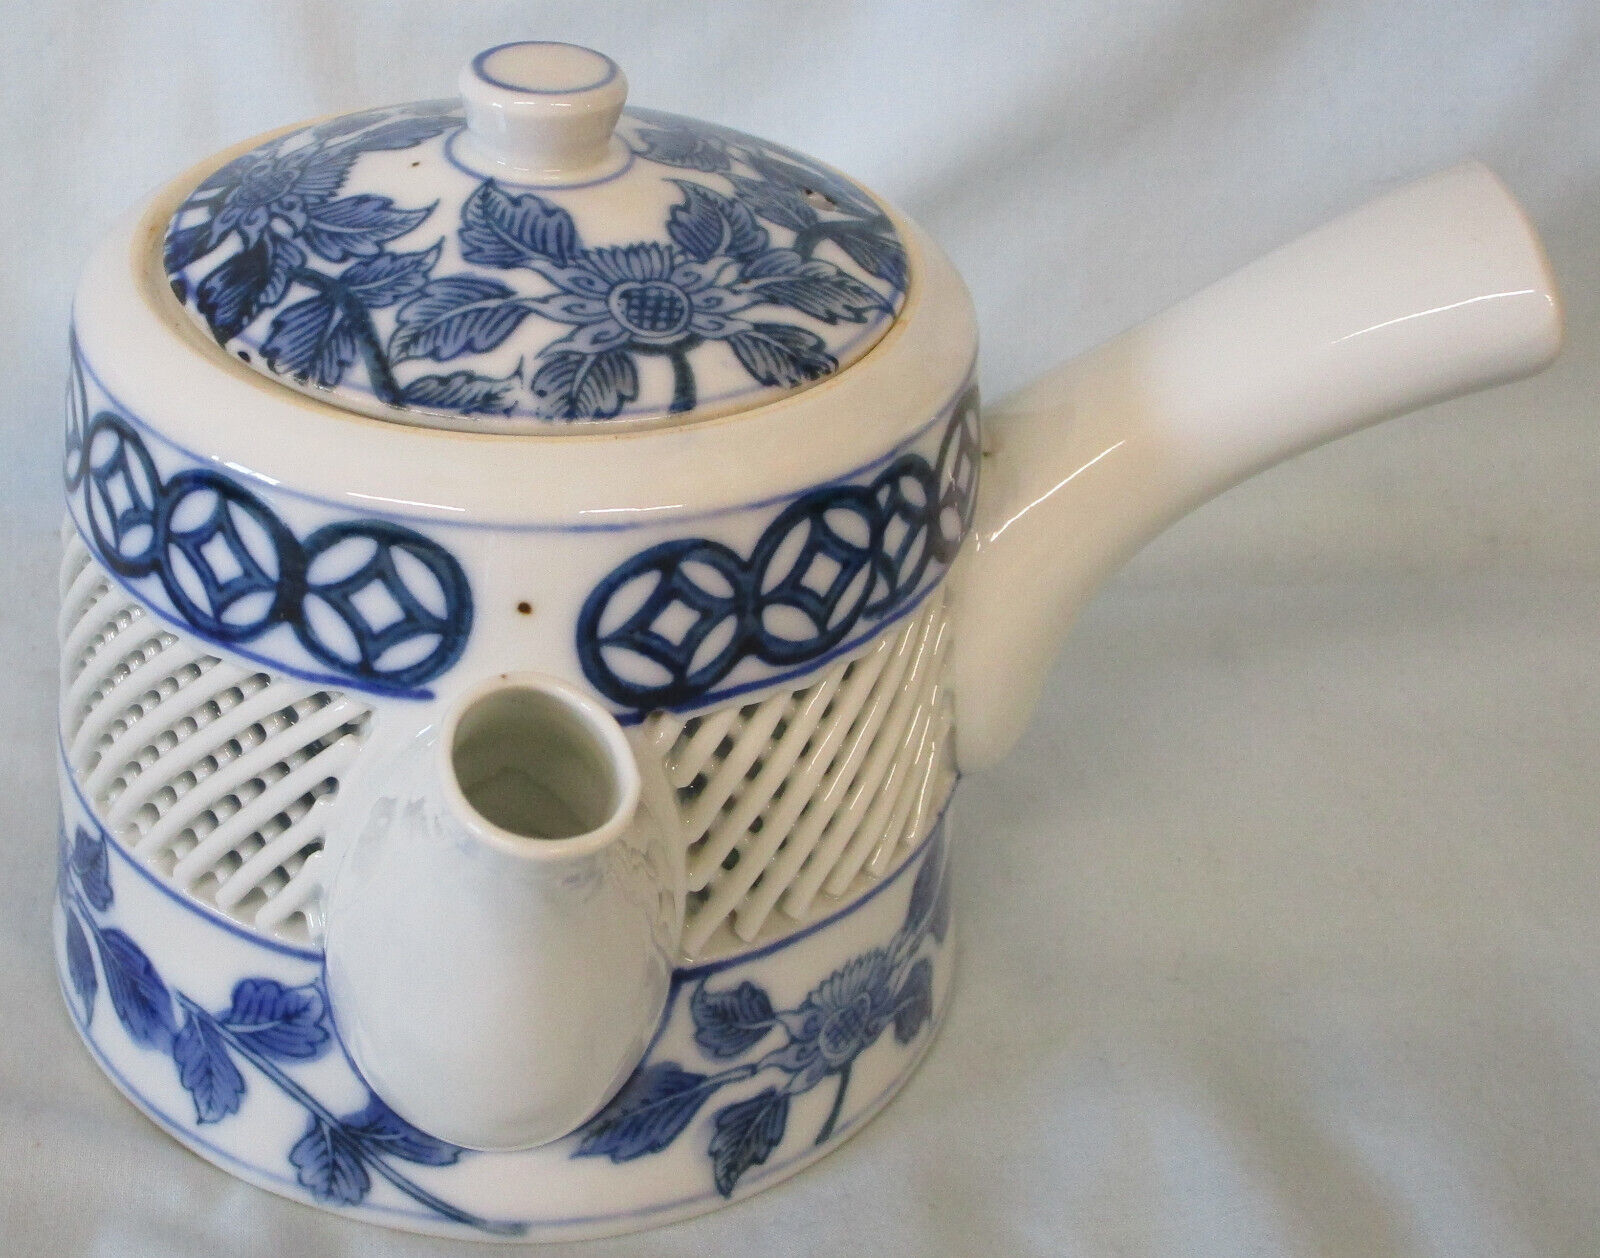 Primary image for Yunomi Sencha Reticulated Lattice Kinpo Hasami Japanese Side Pour Teapot